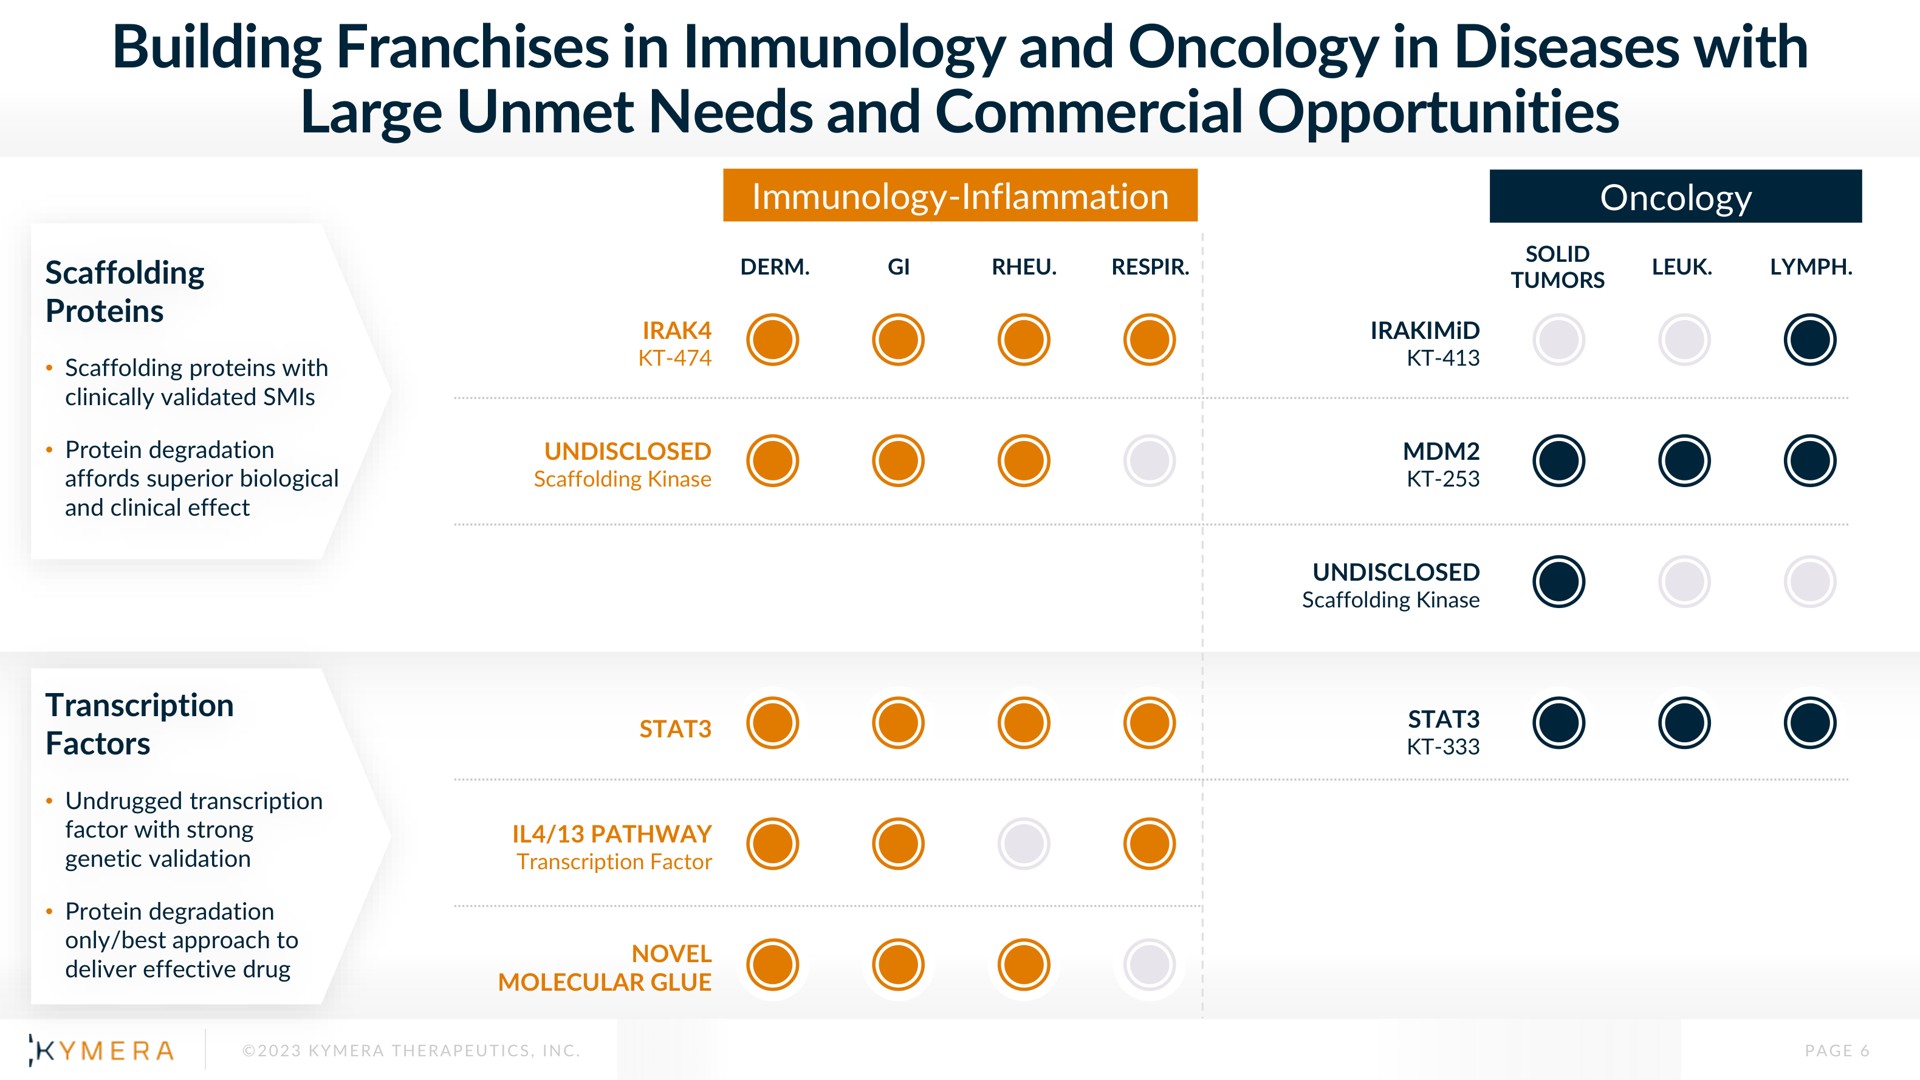 building franchises in immunology and oncology in diseases with large unmet needs and commercial opportunities | Kymera